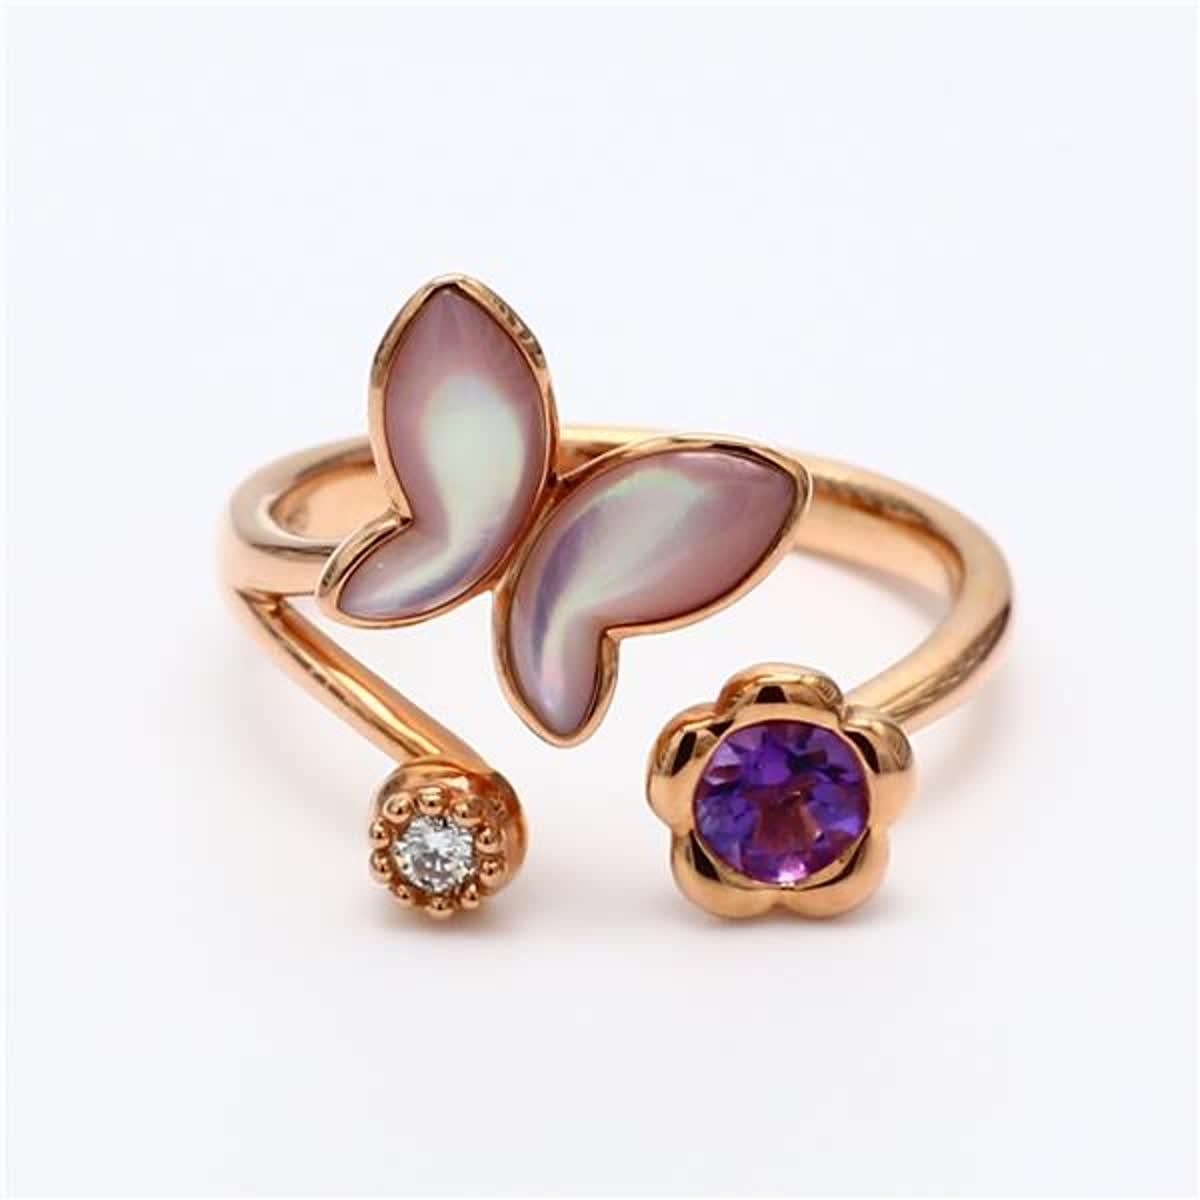 RareGemWorld's classic fashion ring. Mounted in a beautiful 18K Rose Gold setting with a natural amethyst, pink corralium secundum, and a natural round white diamond. This ring is guaranteed to impress and enhance your personal collection!

Total